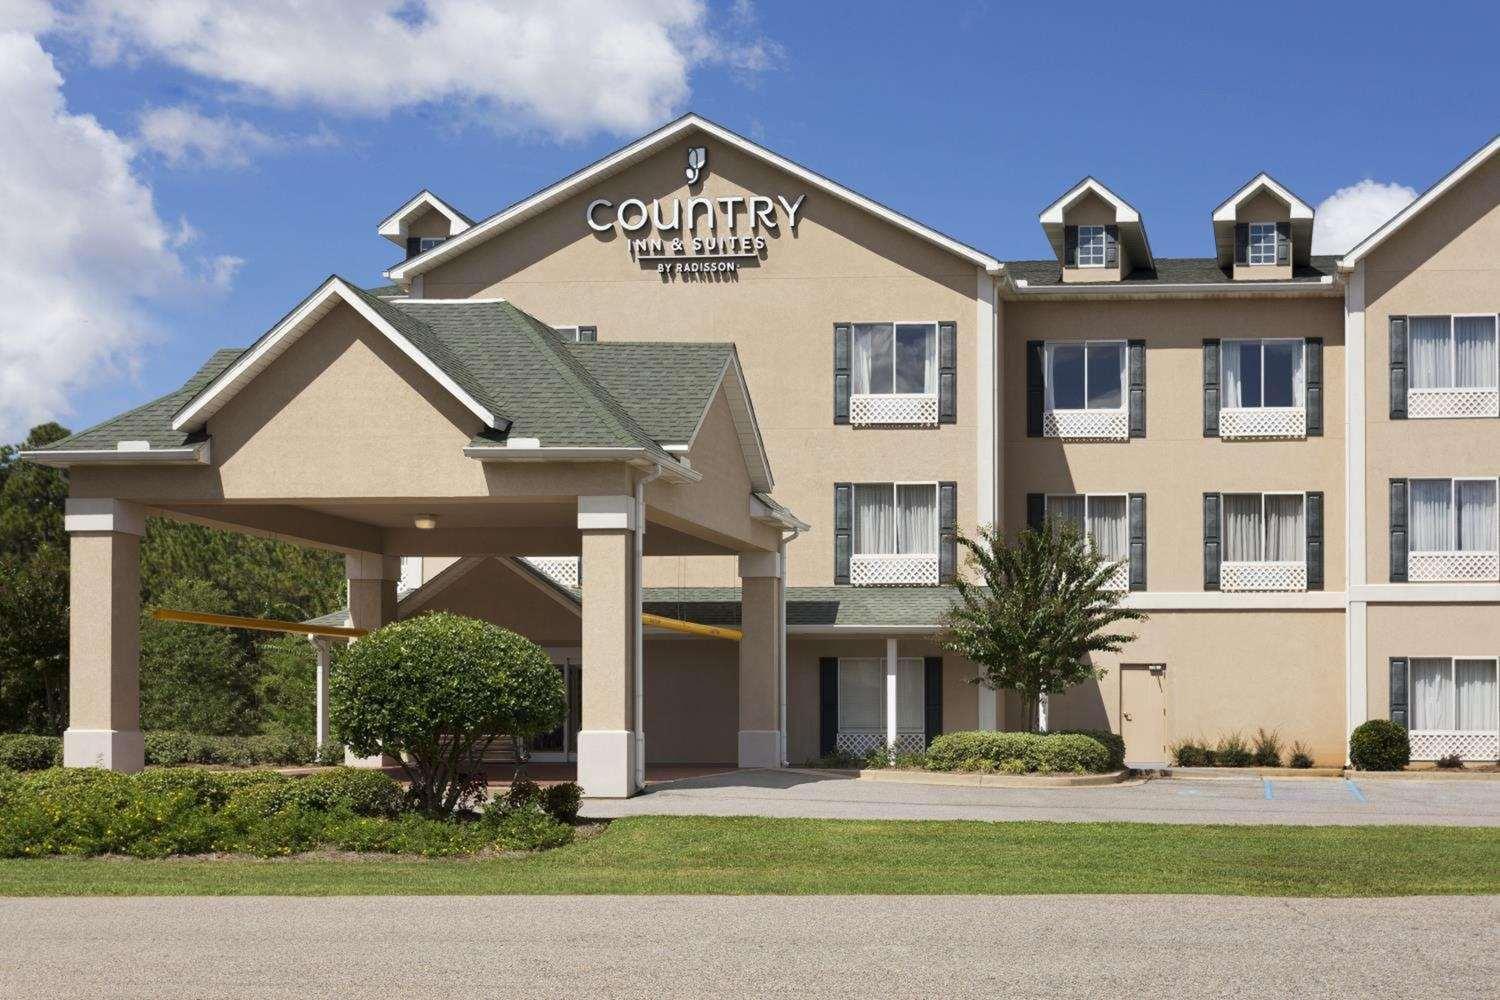 Country Inn & Suites Saraland in Saraland, AL